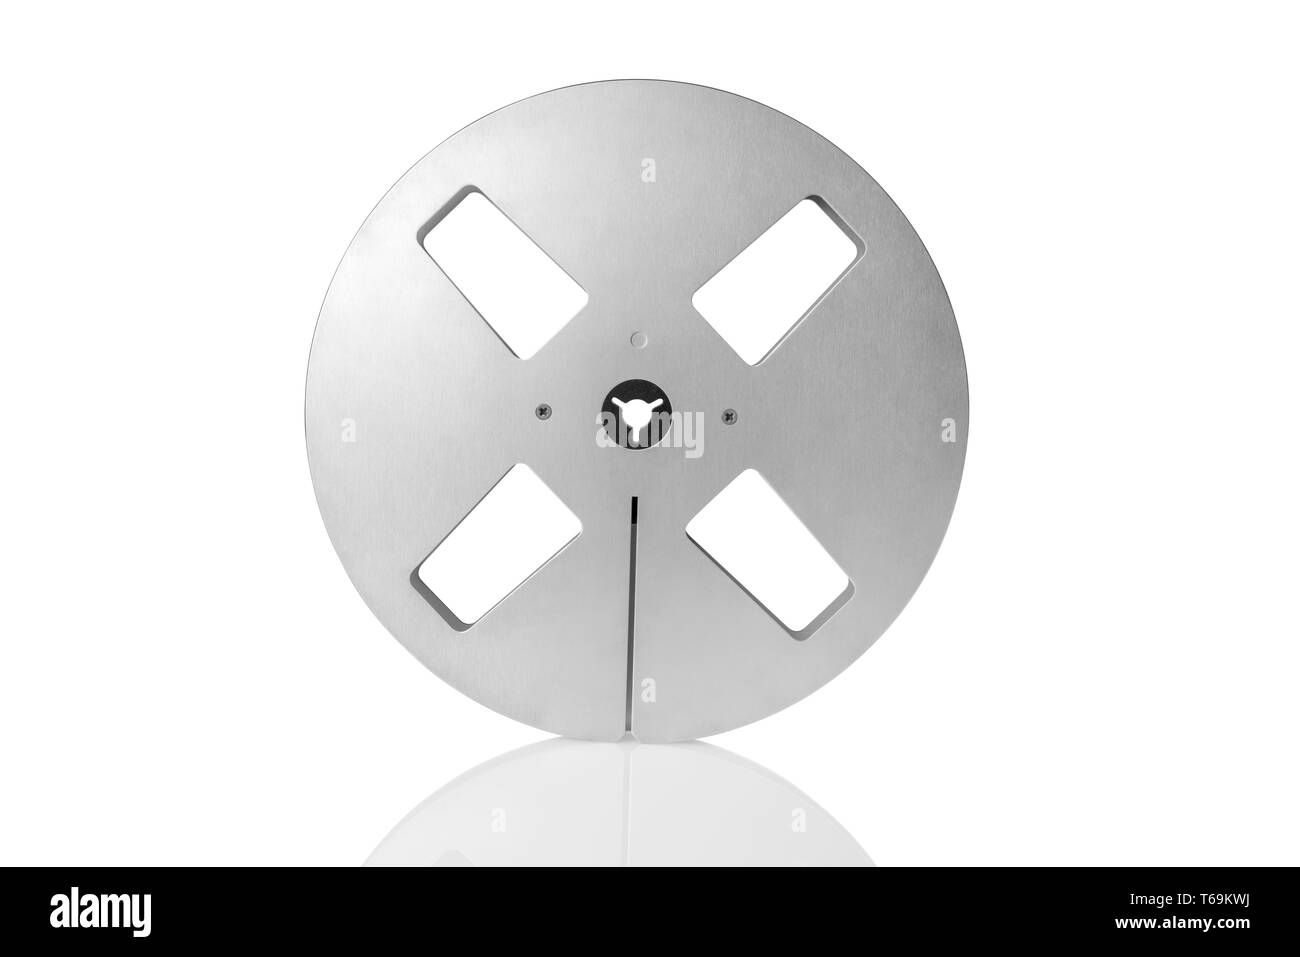 Circle reel Black and White Stock Photos & Images - Alamy